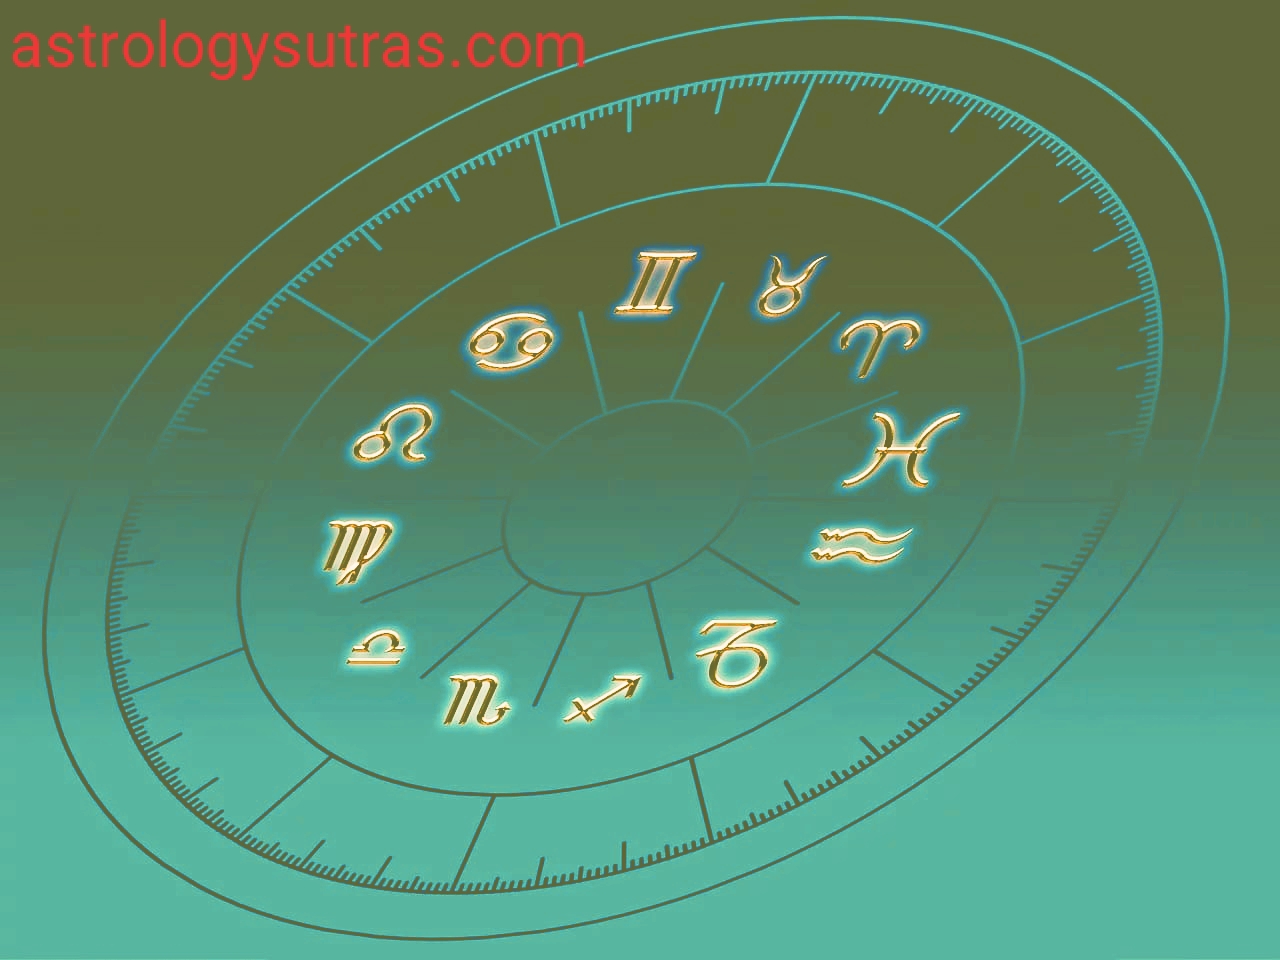 Astrology Sutras